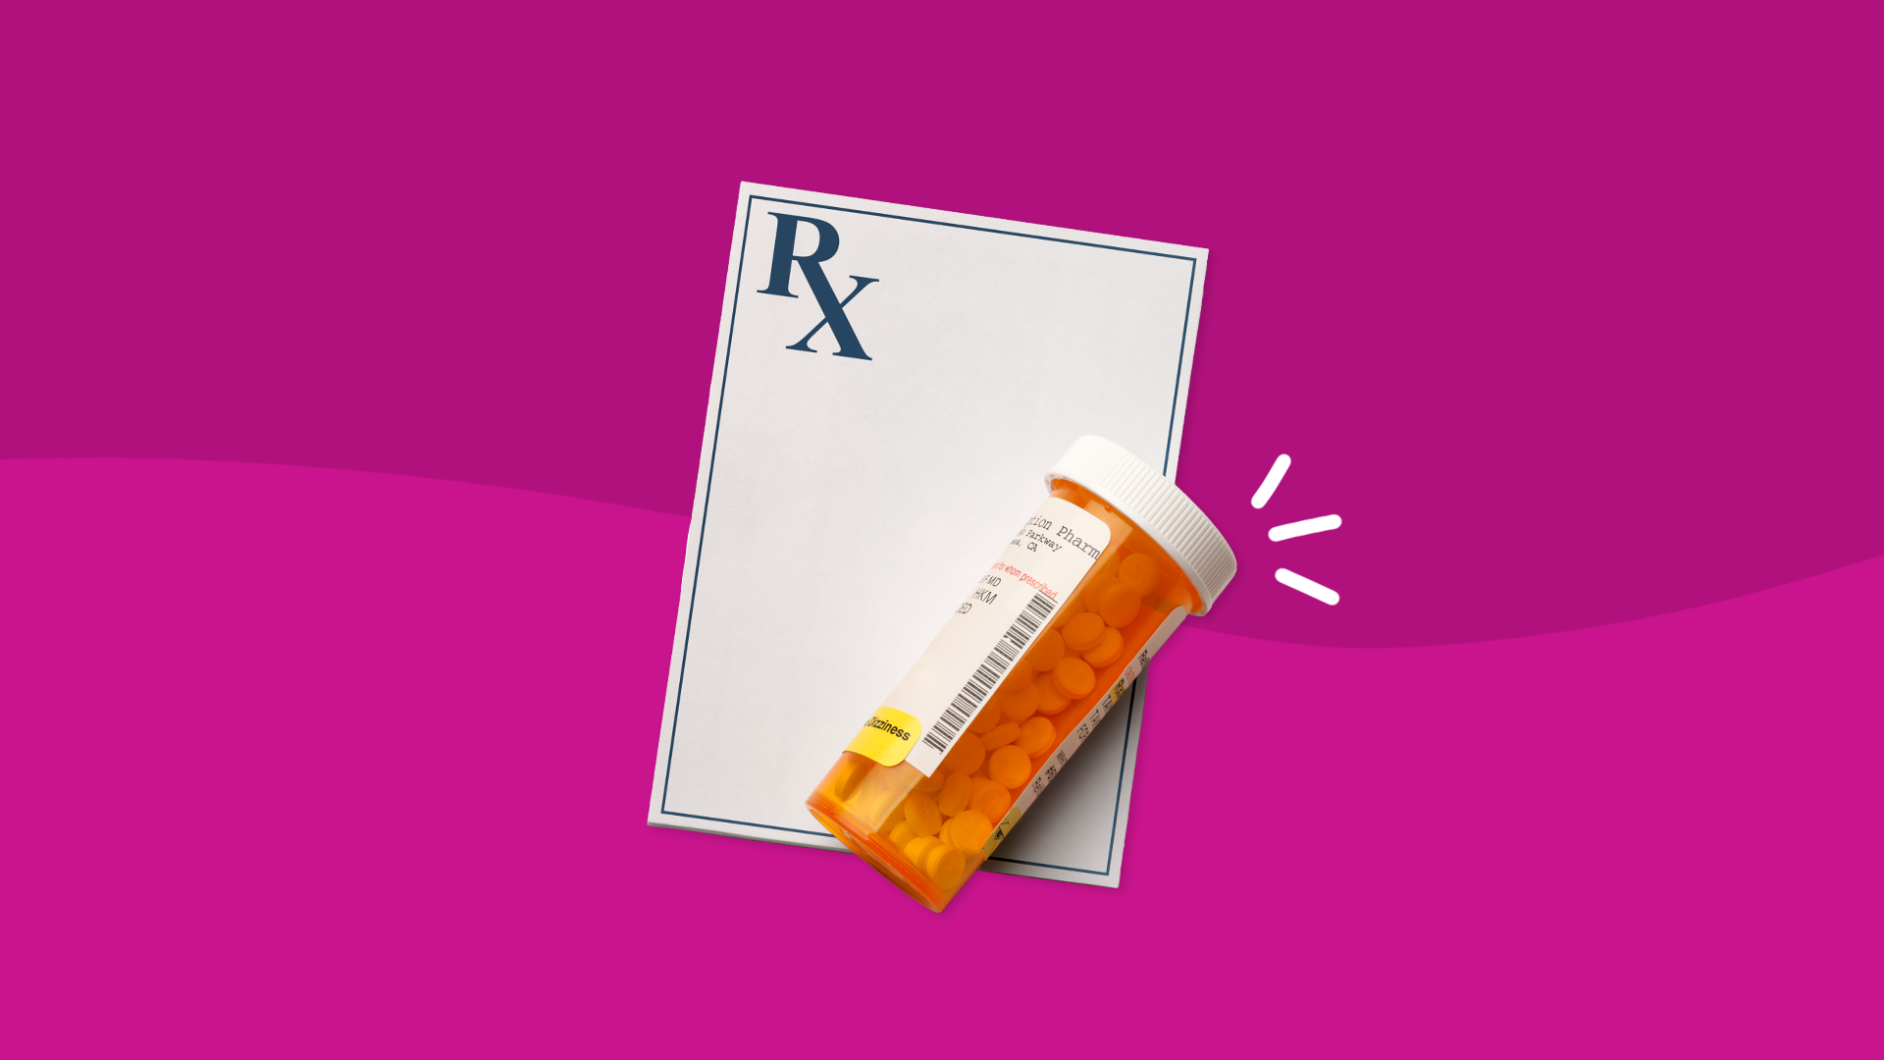 Prescription pad with pill bottle: What are side effects of Ambien?